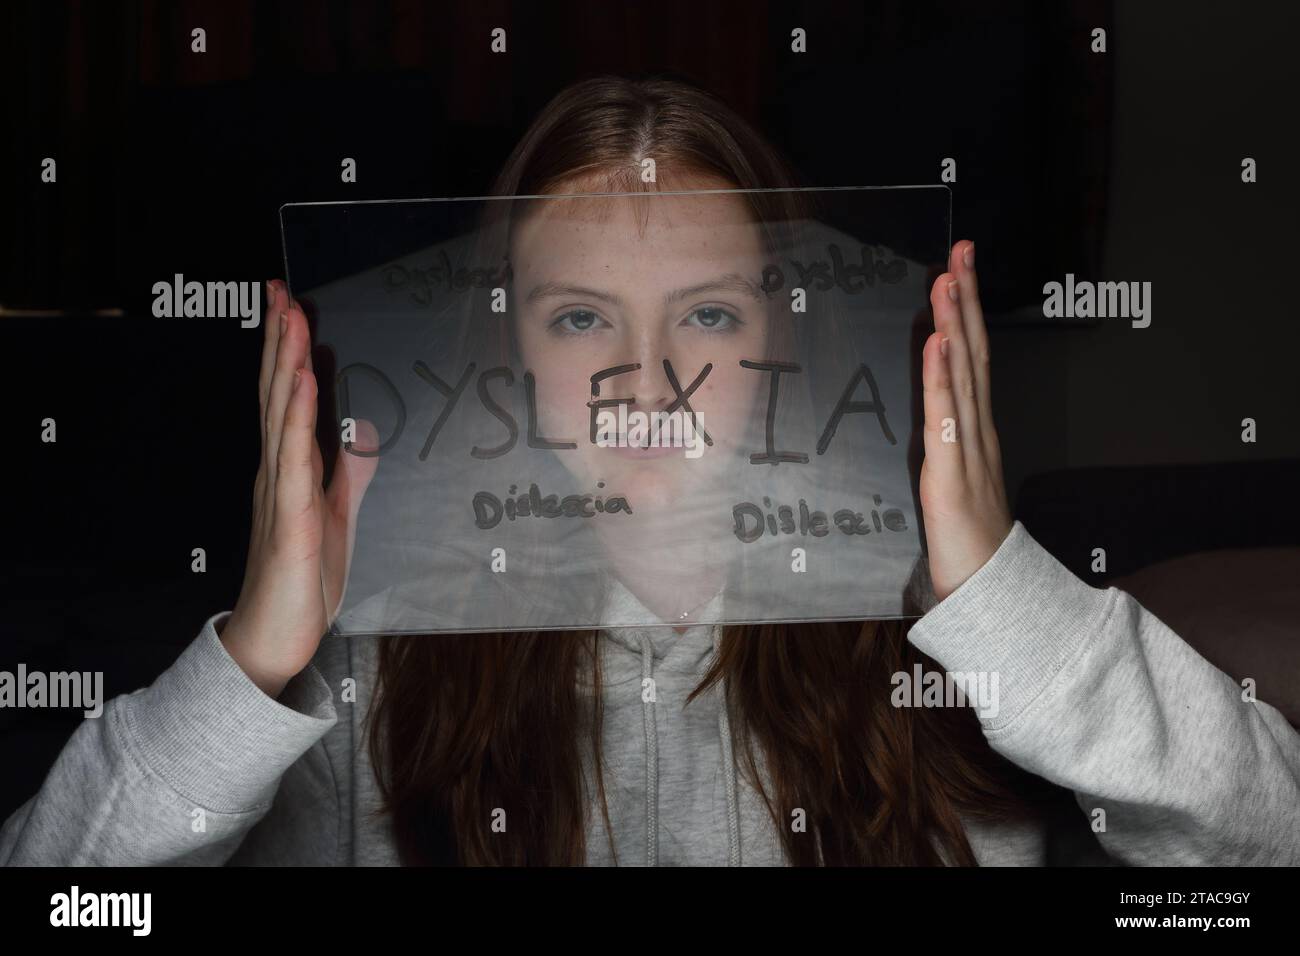 Teenage girl holds transparent plastic board with words related to dyslexia in front of her face, including misspellings Stock Photo